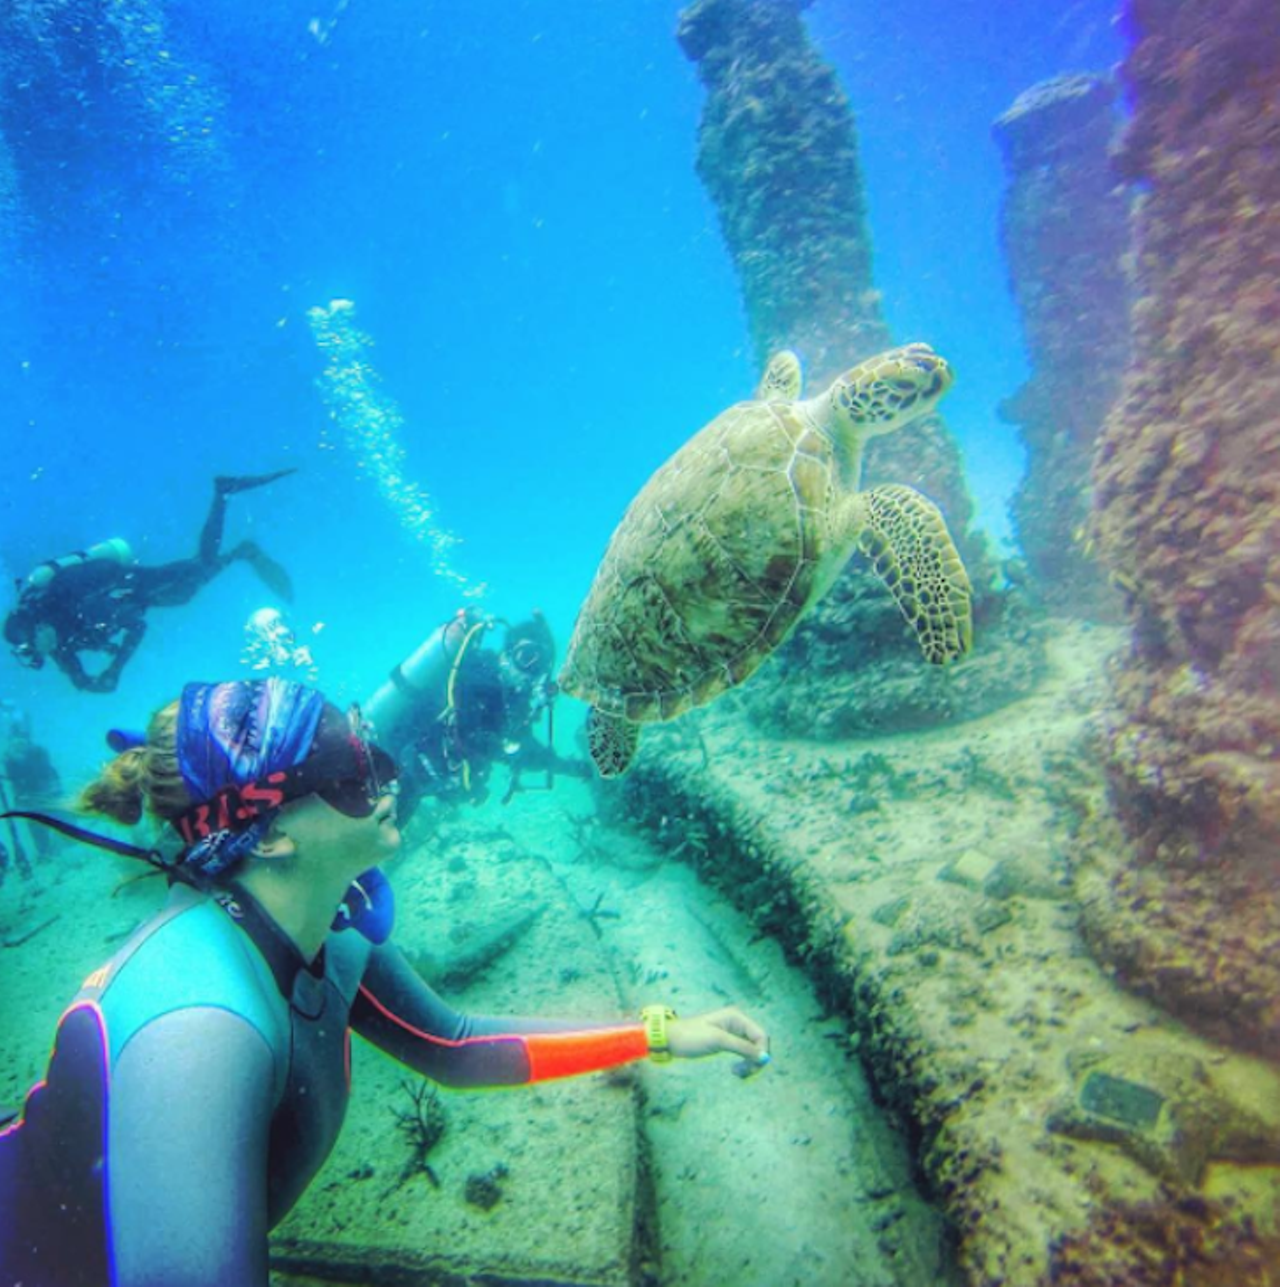 Neptune Memorial Reef
300 Alton Road, Miami Beach | 954-655-3592
Cremated ashes are mixed with cement to form these super goth memorials that make up a 16-acre artificial reef called Neptune Memorial Reef. These sunken monoliths are located about three miles off the coast of Key Biscayne.
Photo via laurendafish/Instagram